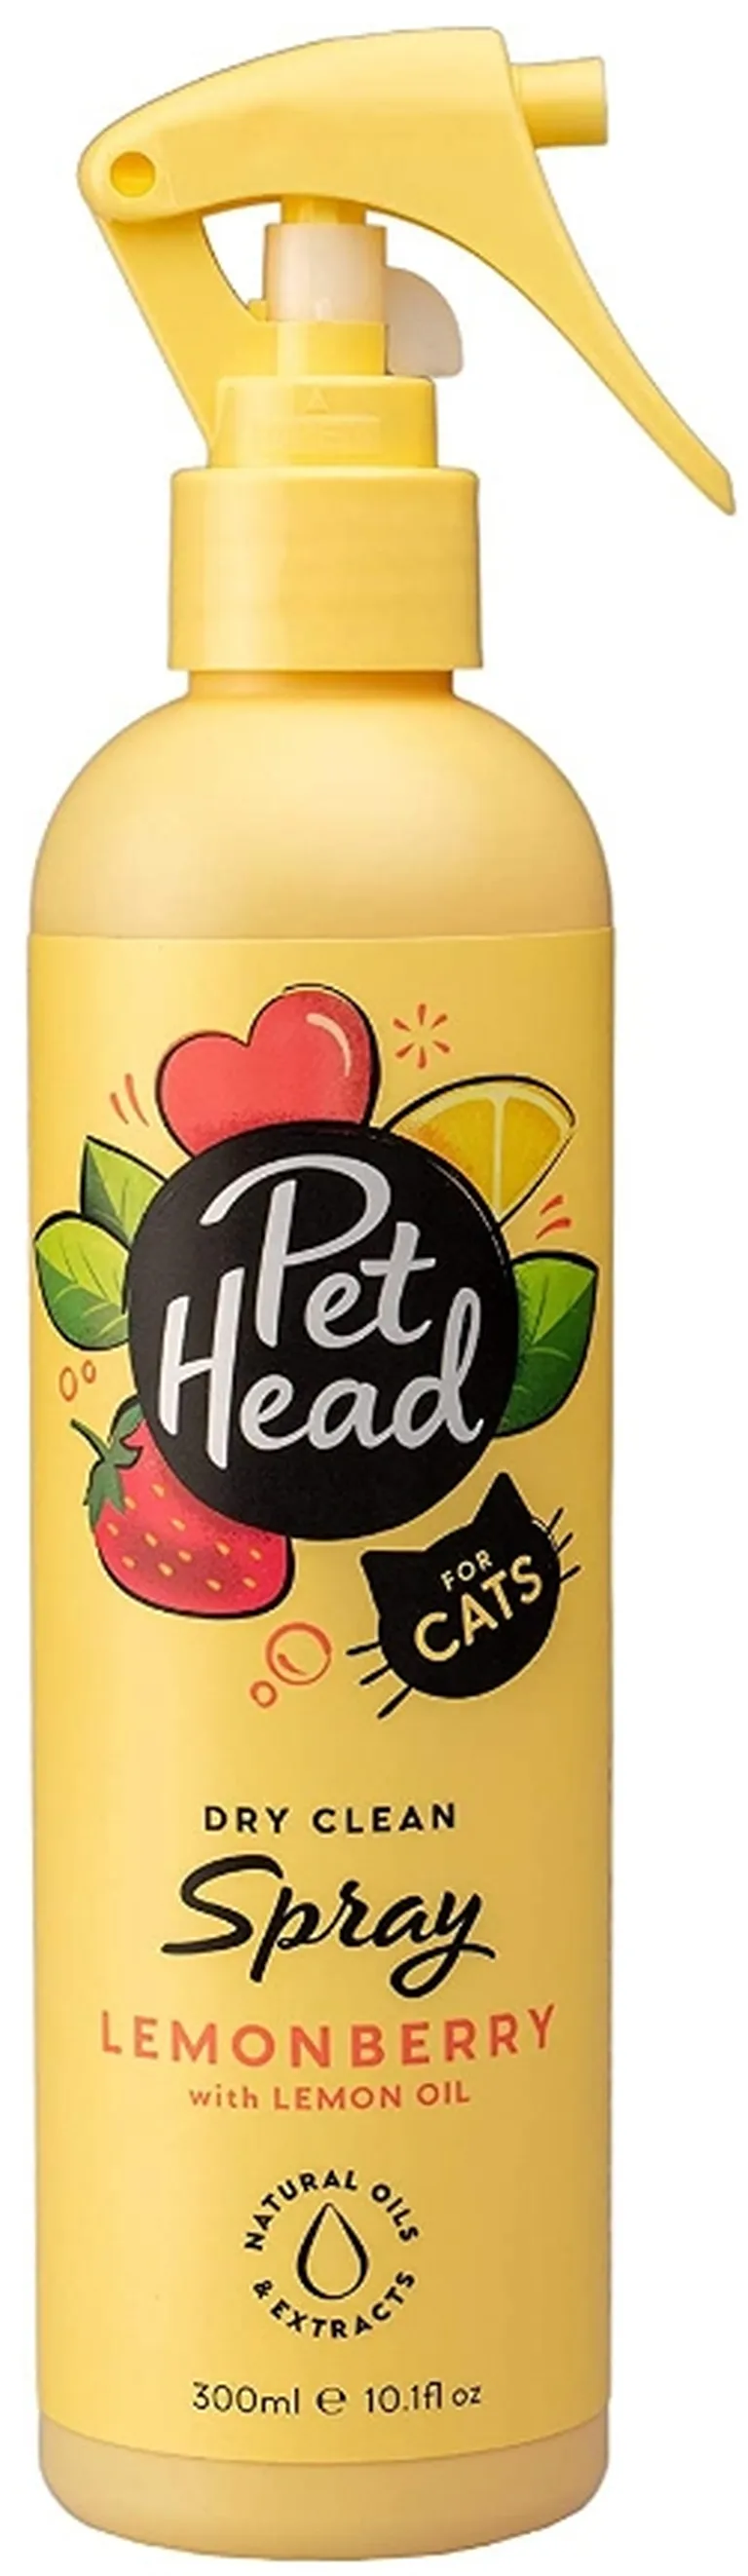 Pet Head Dry Clean Spray for Cats Lemonberry with Lemon Oil Photo 1